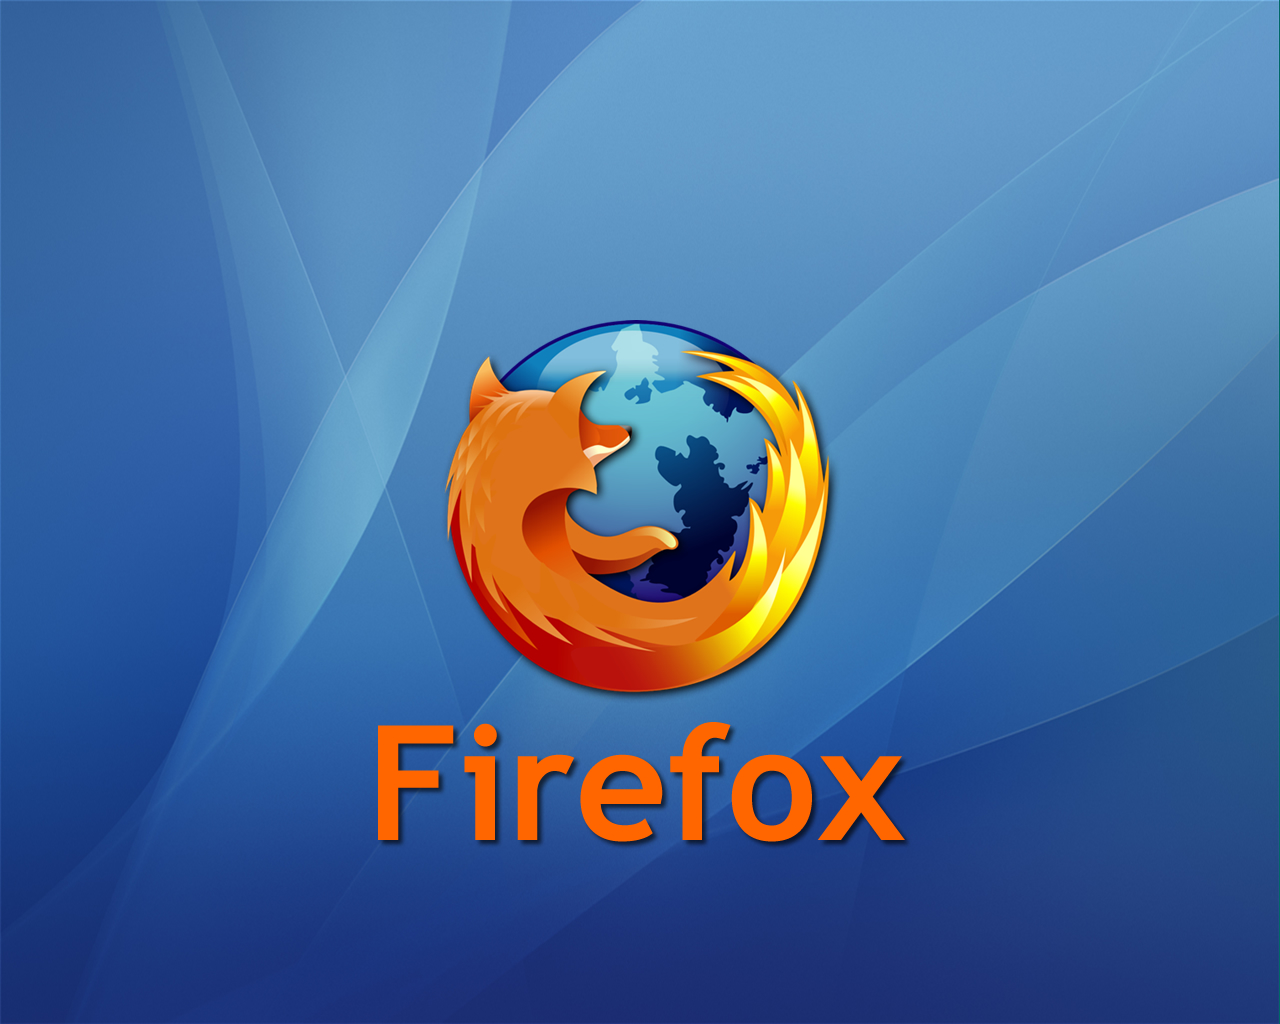 mozilla firefox for pc